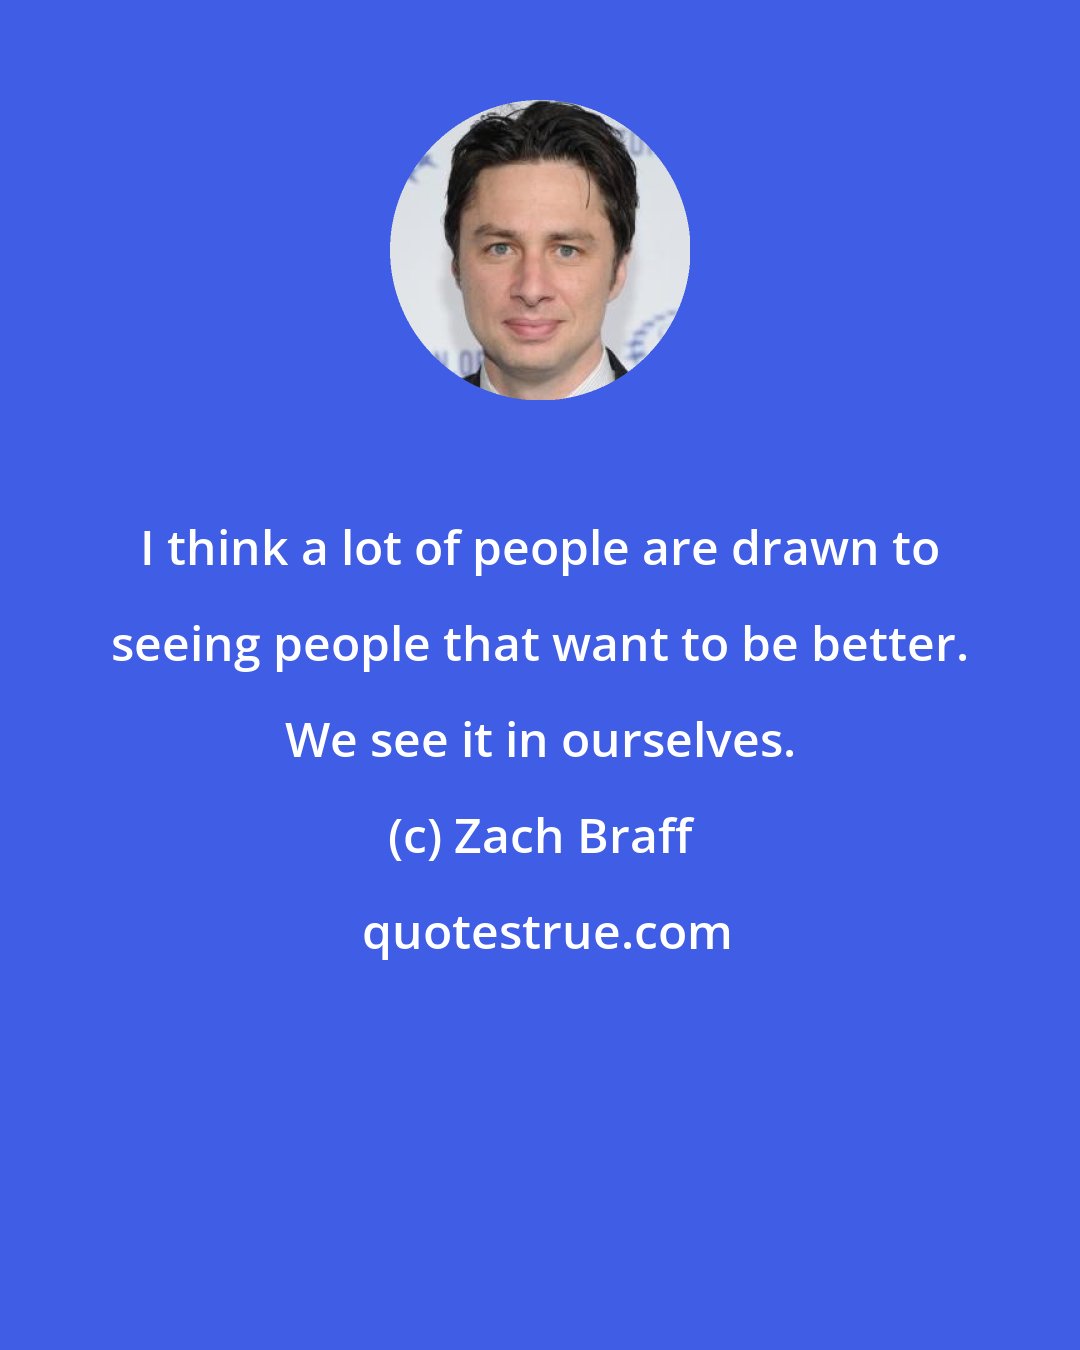 Zach Braff: I think a lot of people are drawn to seeing people that want to be better. We see it in ourselves.